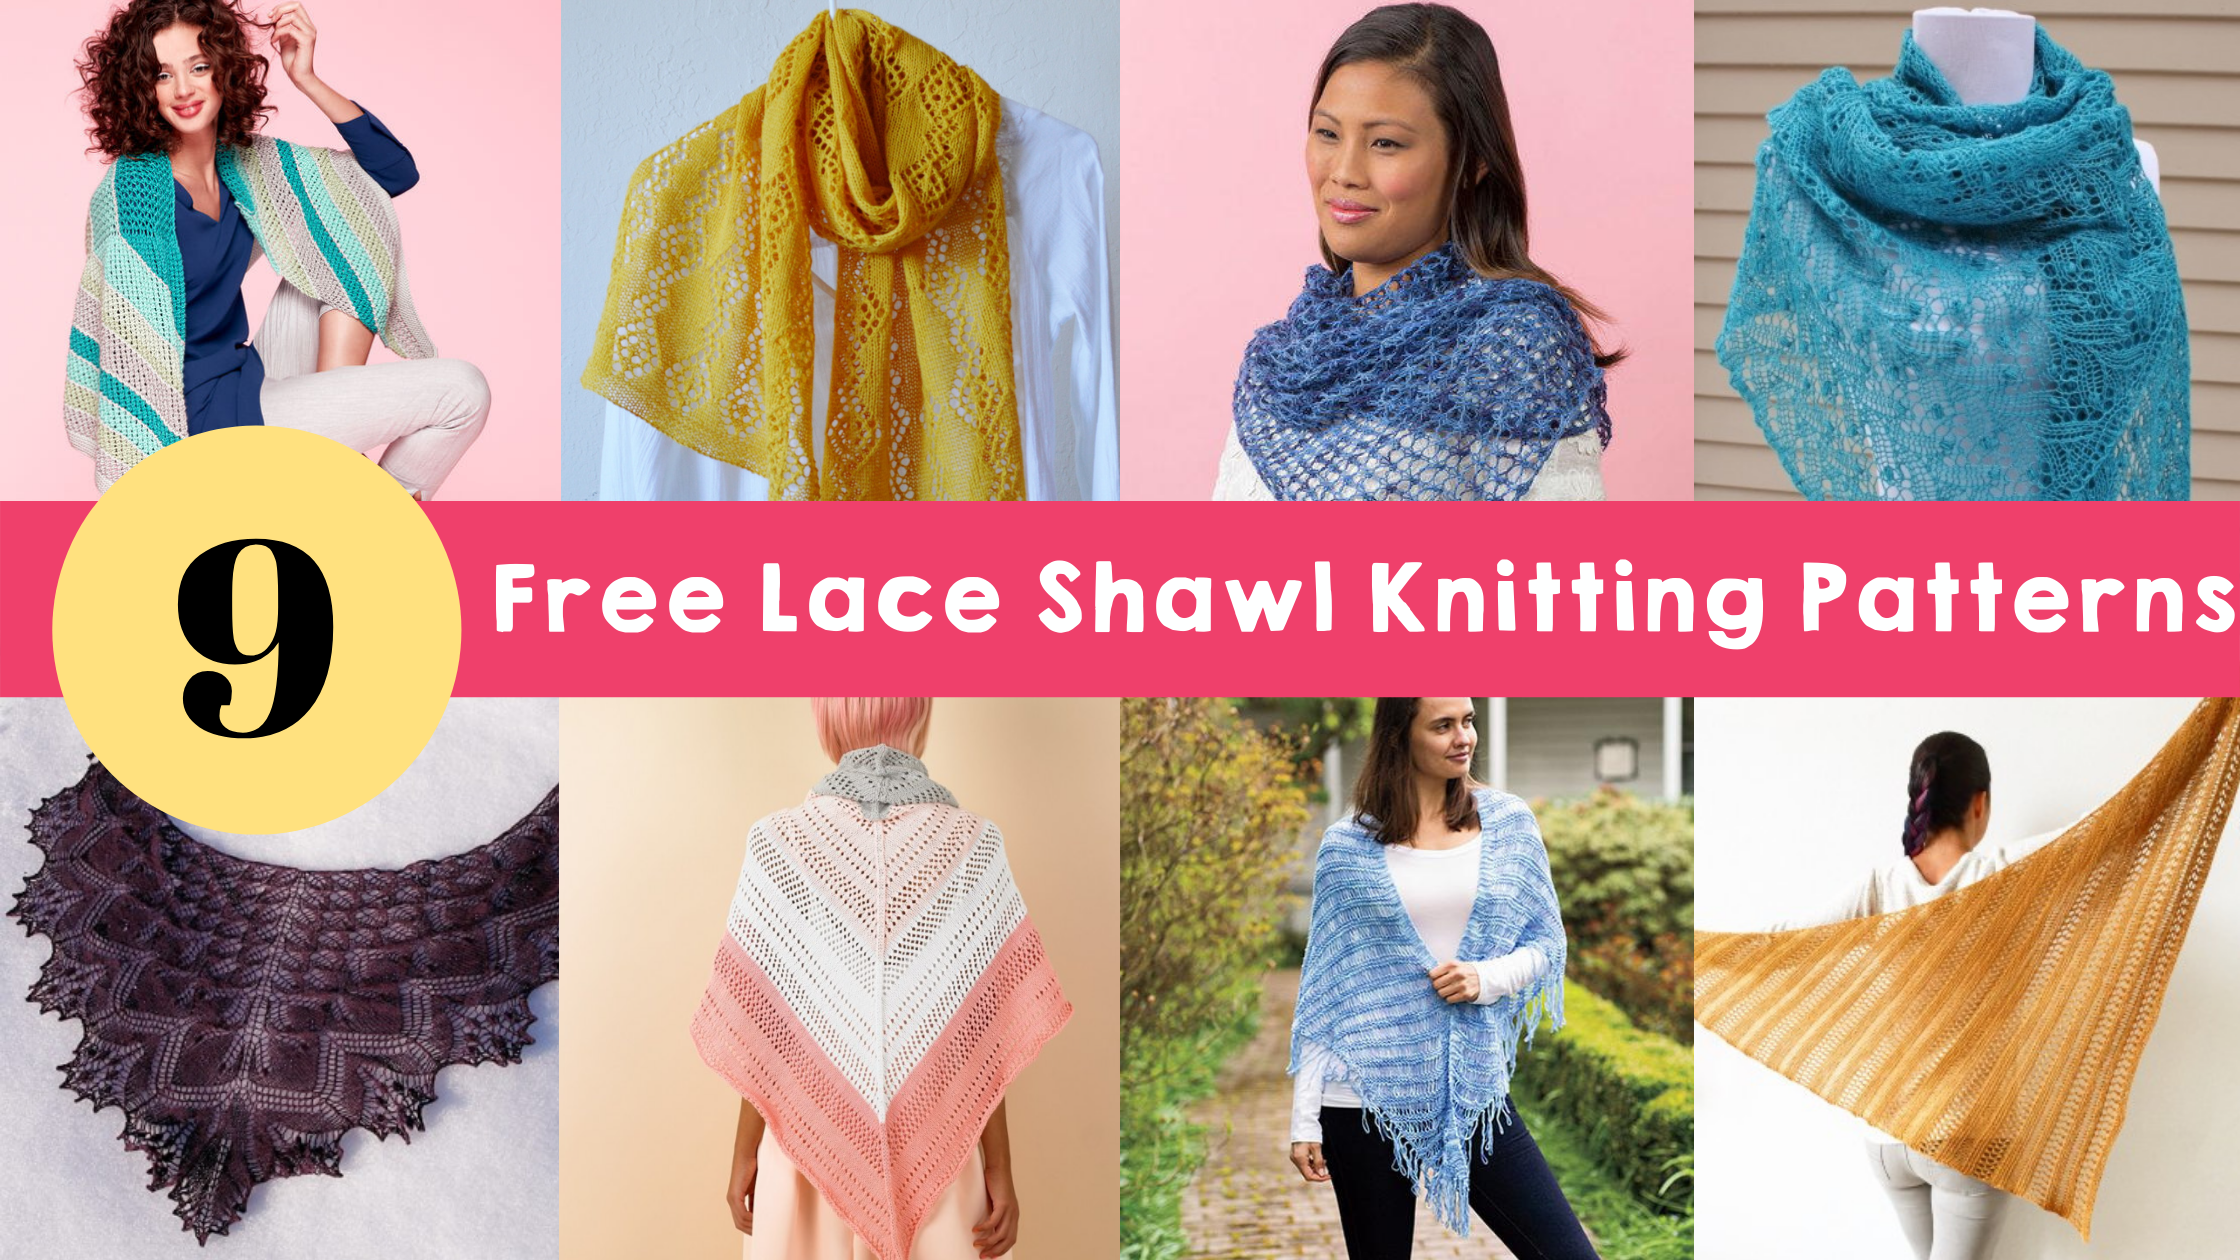 Our Top 9 FREE Lace Shawl Knitting Patterns, Blog